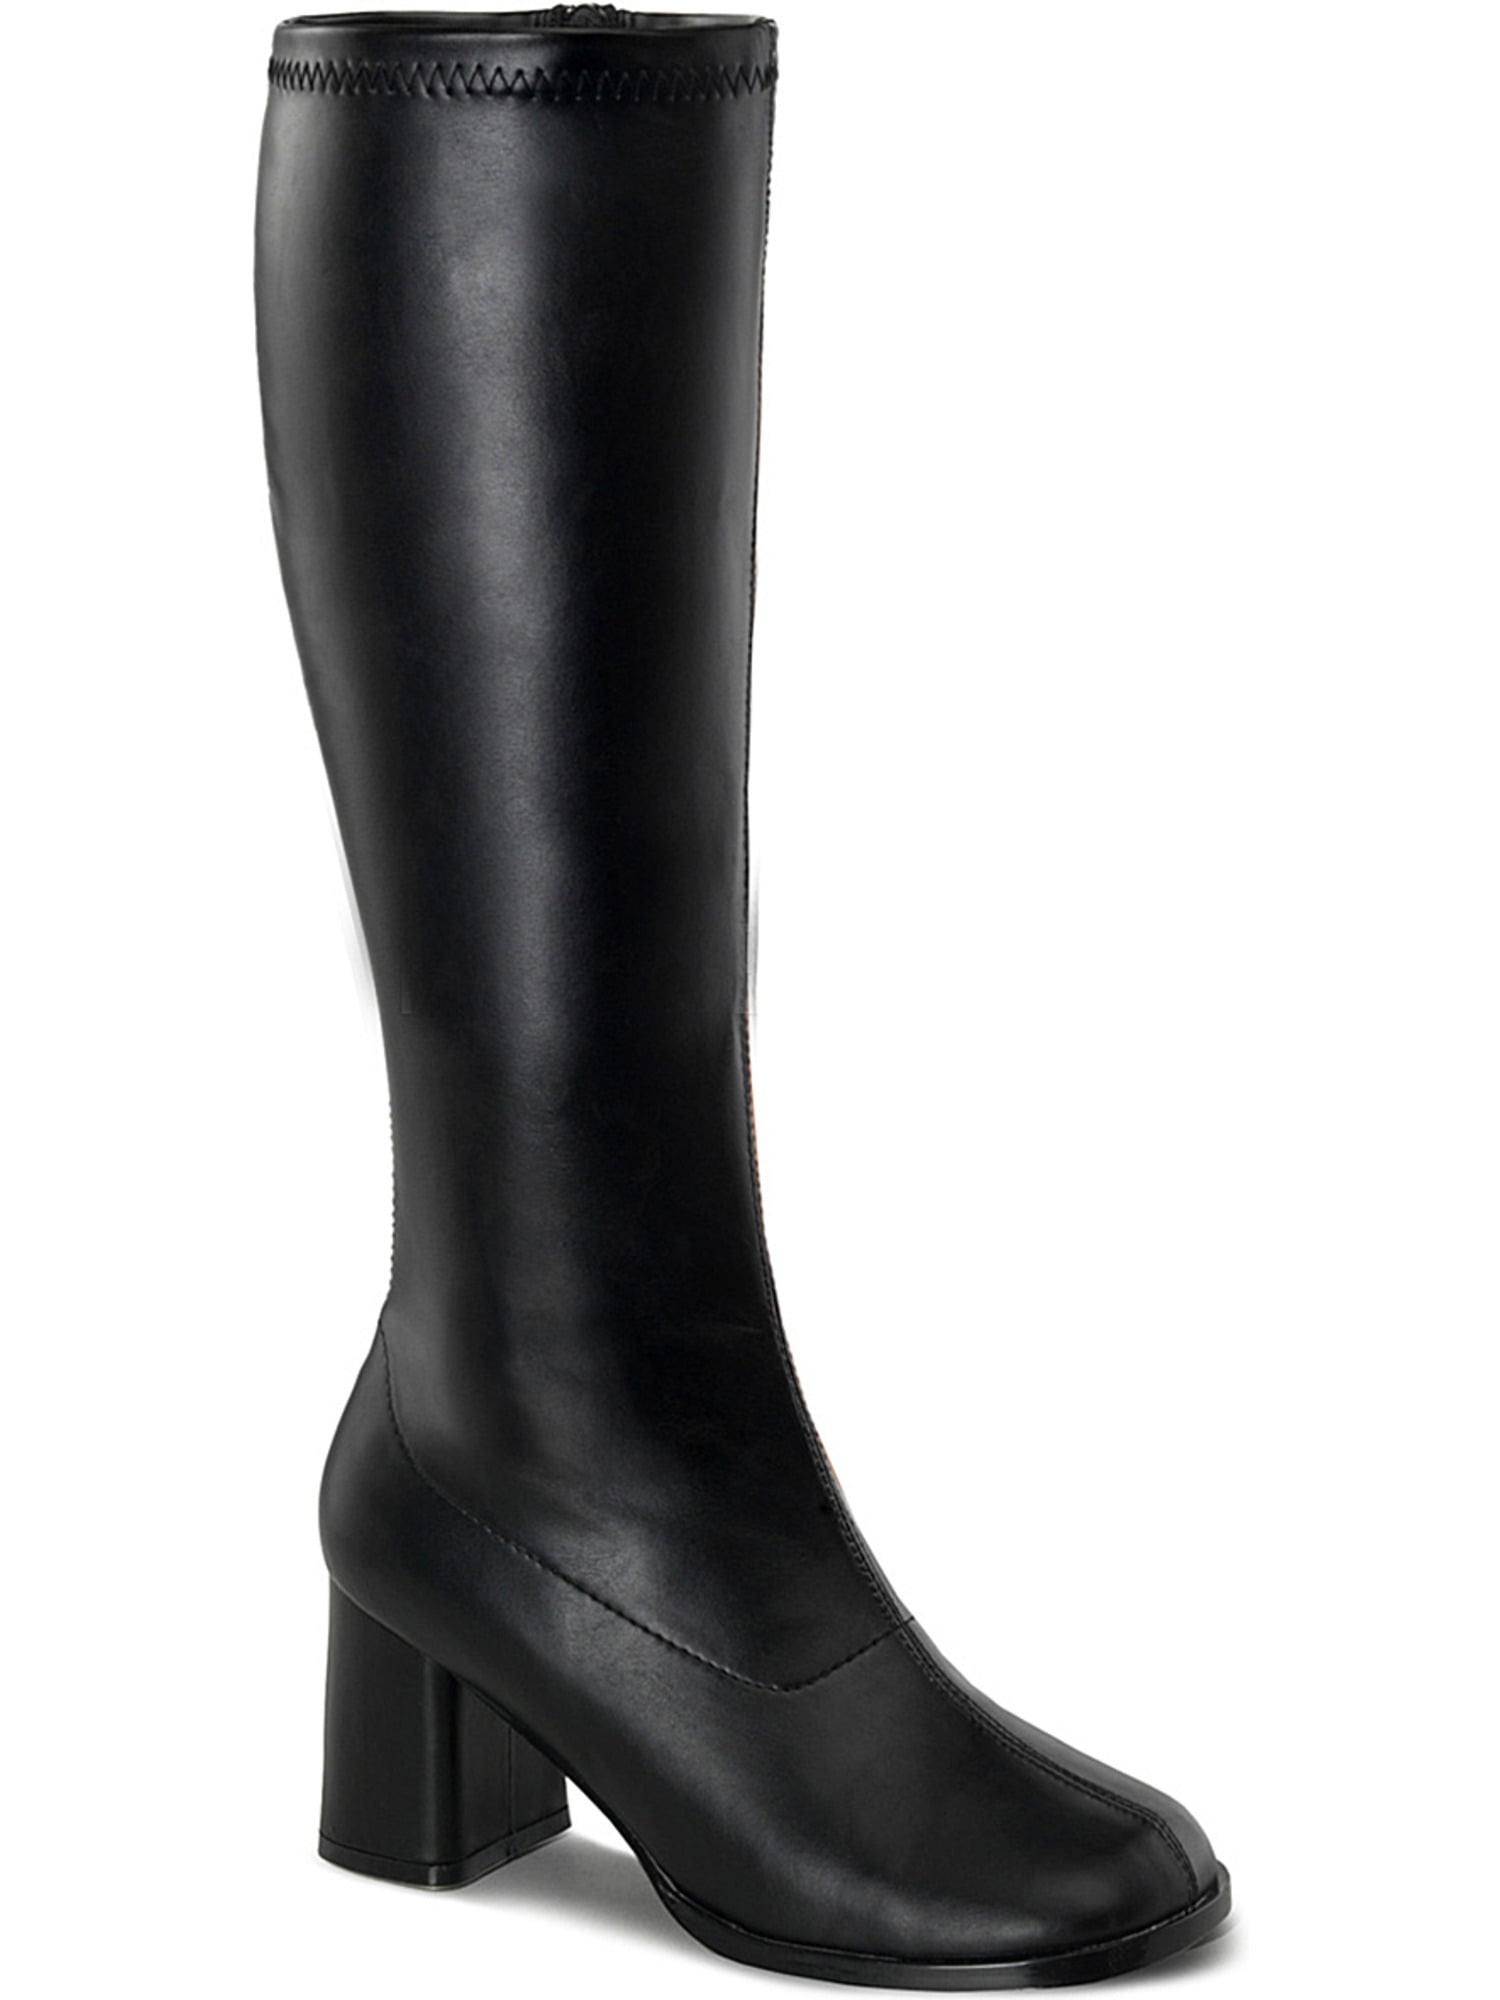 Womens Knee High Boots GOGO 3 Inch WIDE 